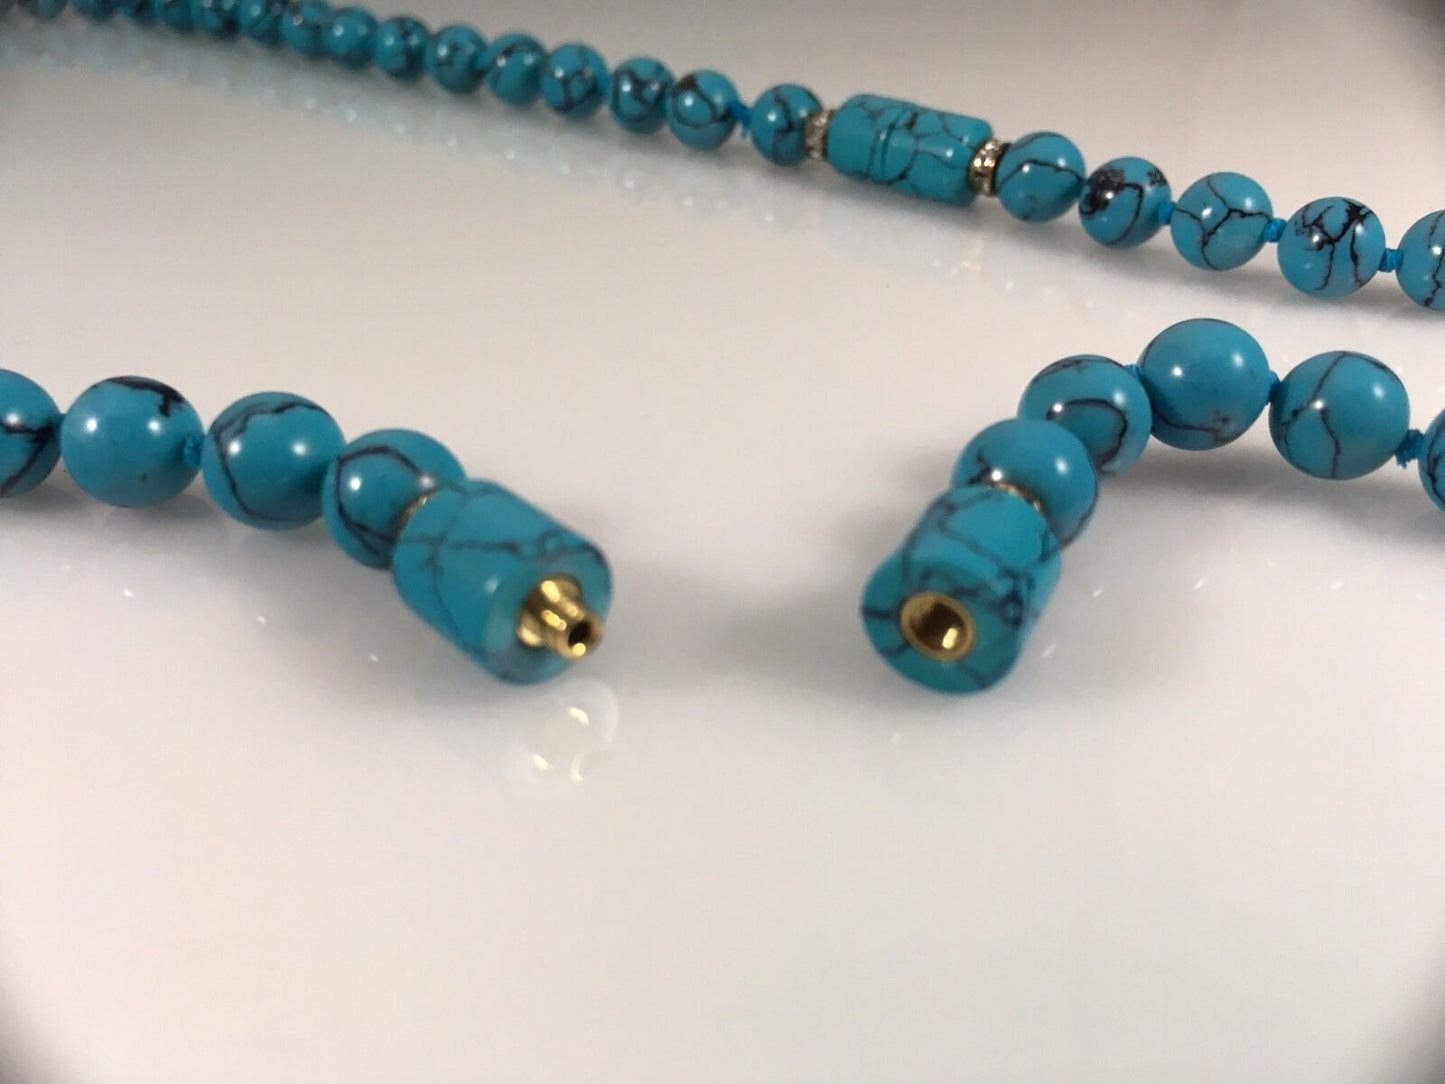 Gorgeous Beaded Turquoise Necklace and Bracelet Set, 16" & 7", Connected 23"